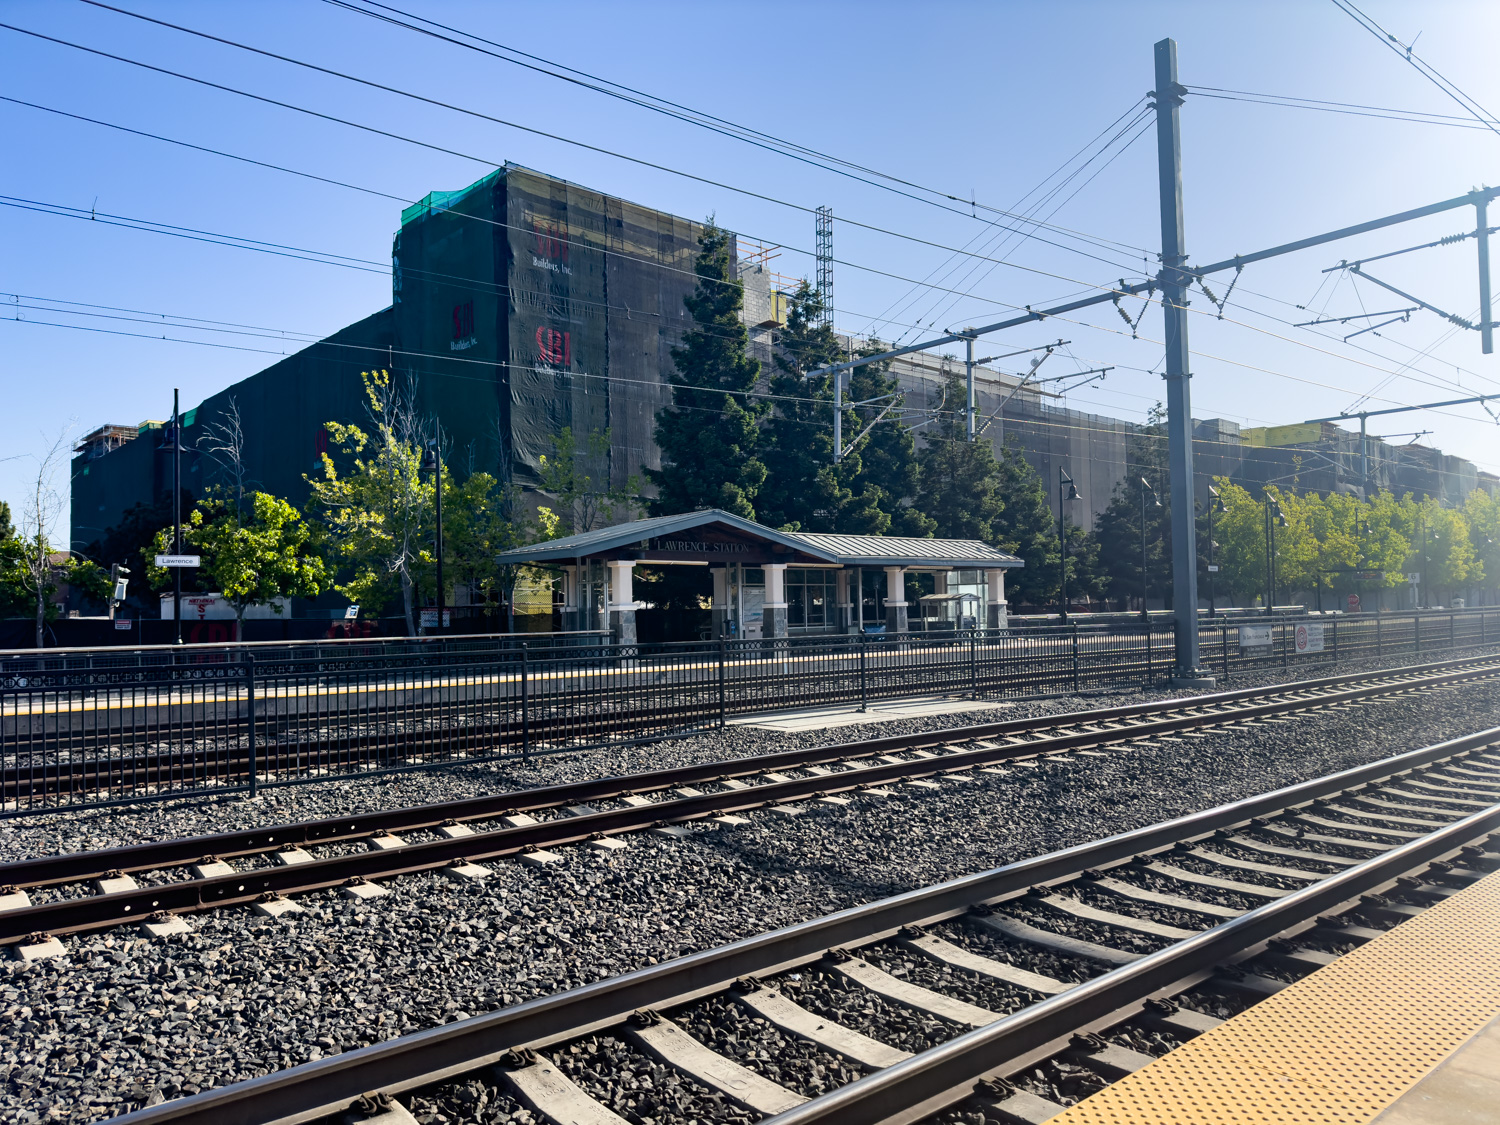 1175 Aster Avenue seen from the Caltrain Lawrence Station, image by author